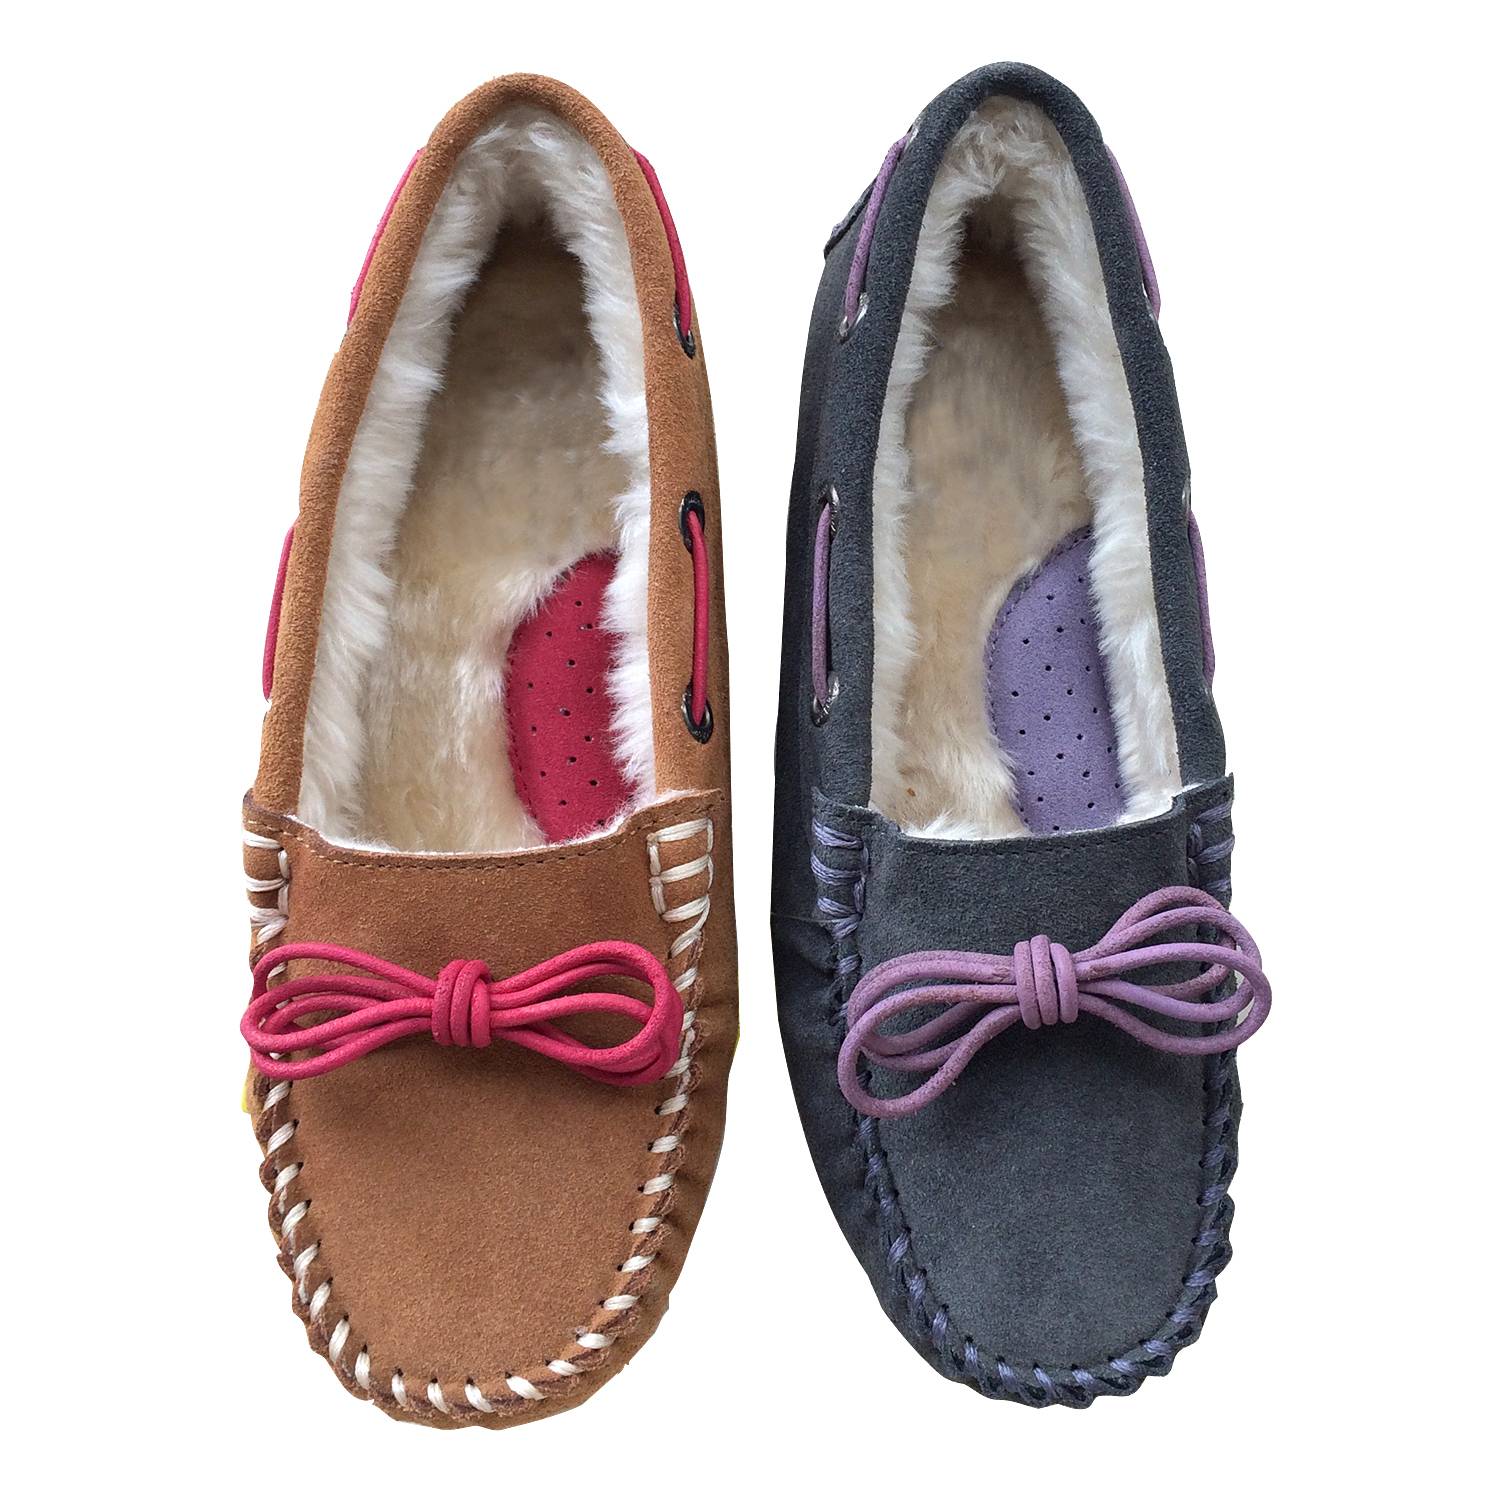 Moccasins for Women Cozy Pile Lined with Micro suede Upper Indoor Outdoor Slip On House Shoes